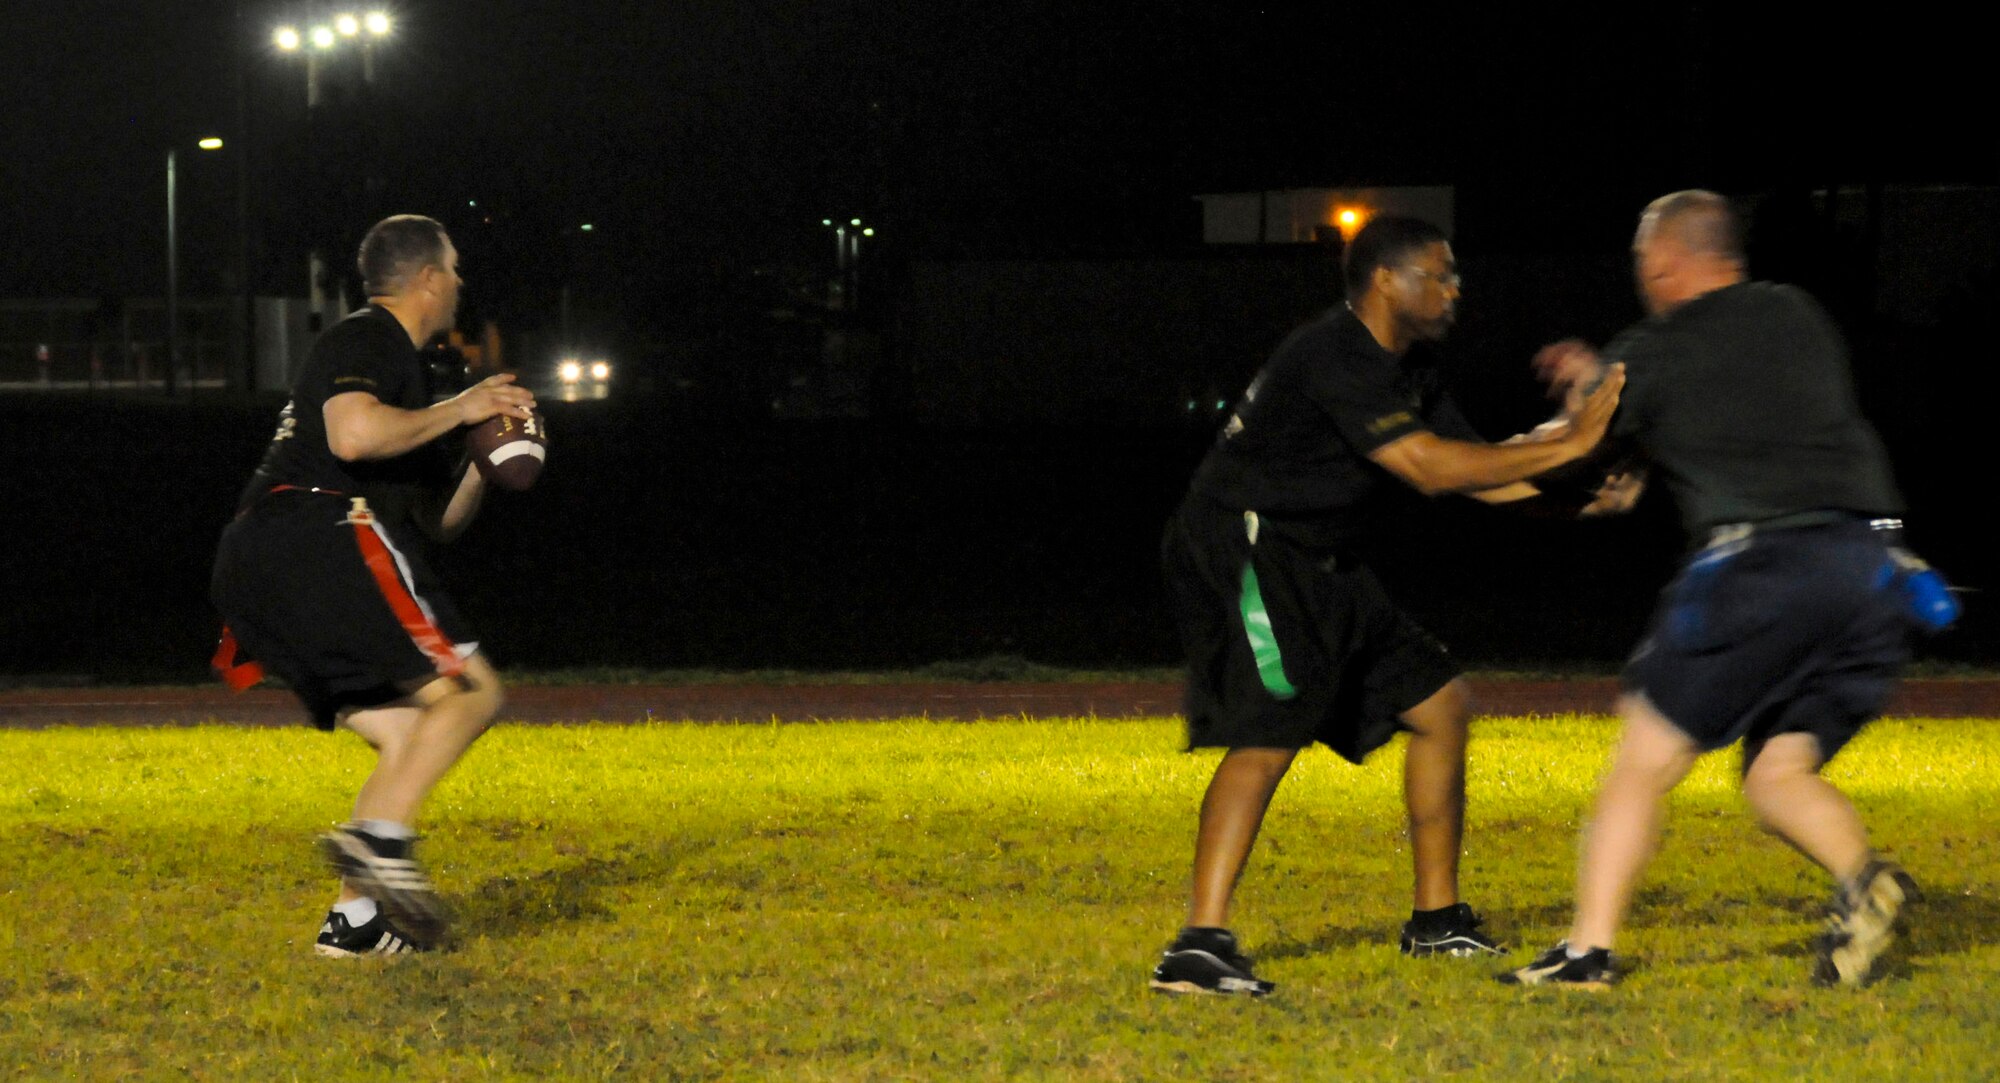 A member from the 94th Army Air and Missile Defense Command looks for open receivers during an intramural football game against the 36th Civil Engineer Squadron Nov. 6, 2013, on Andersen Air Force Base, Guam. The 36th CES defeated the 94th AAMDC 18-14. (U.S. Air Force photo by Airman 1st Class Amanda Morris/Released)